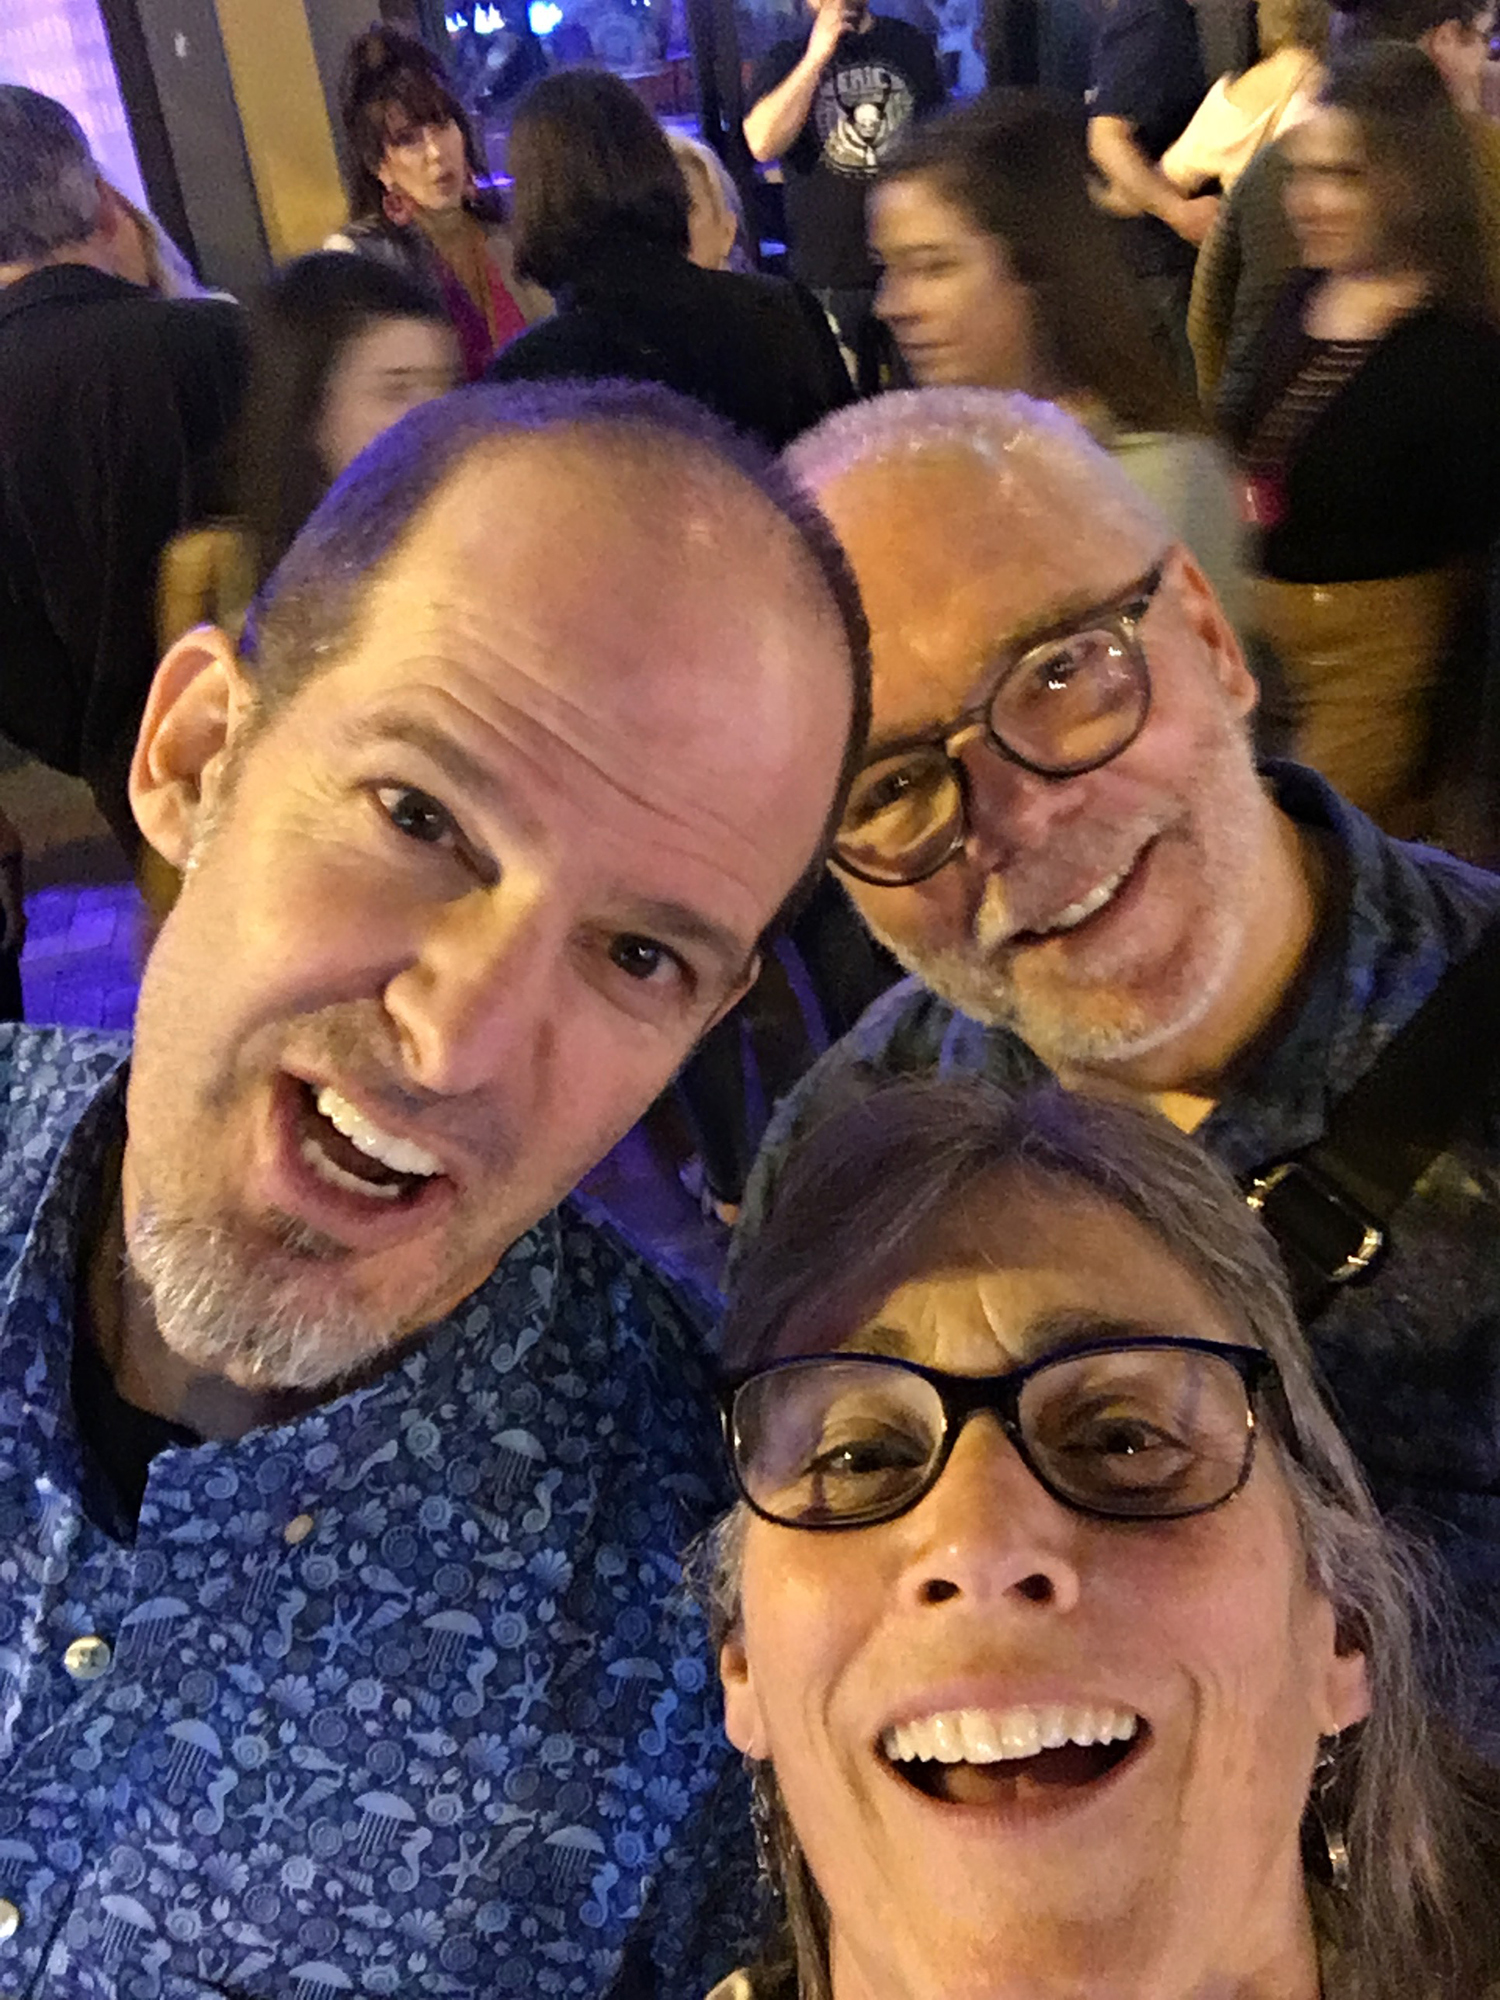  Tuesday night, on Broadway, after the Snow Patrol concert. Mark, Scott and I having fun on the crowded streets. 